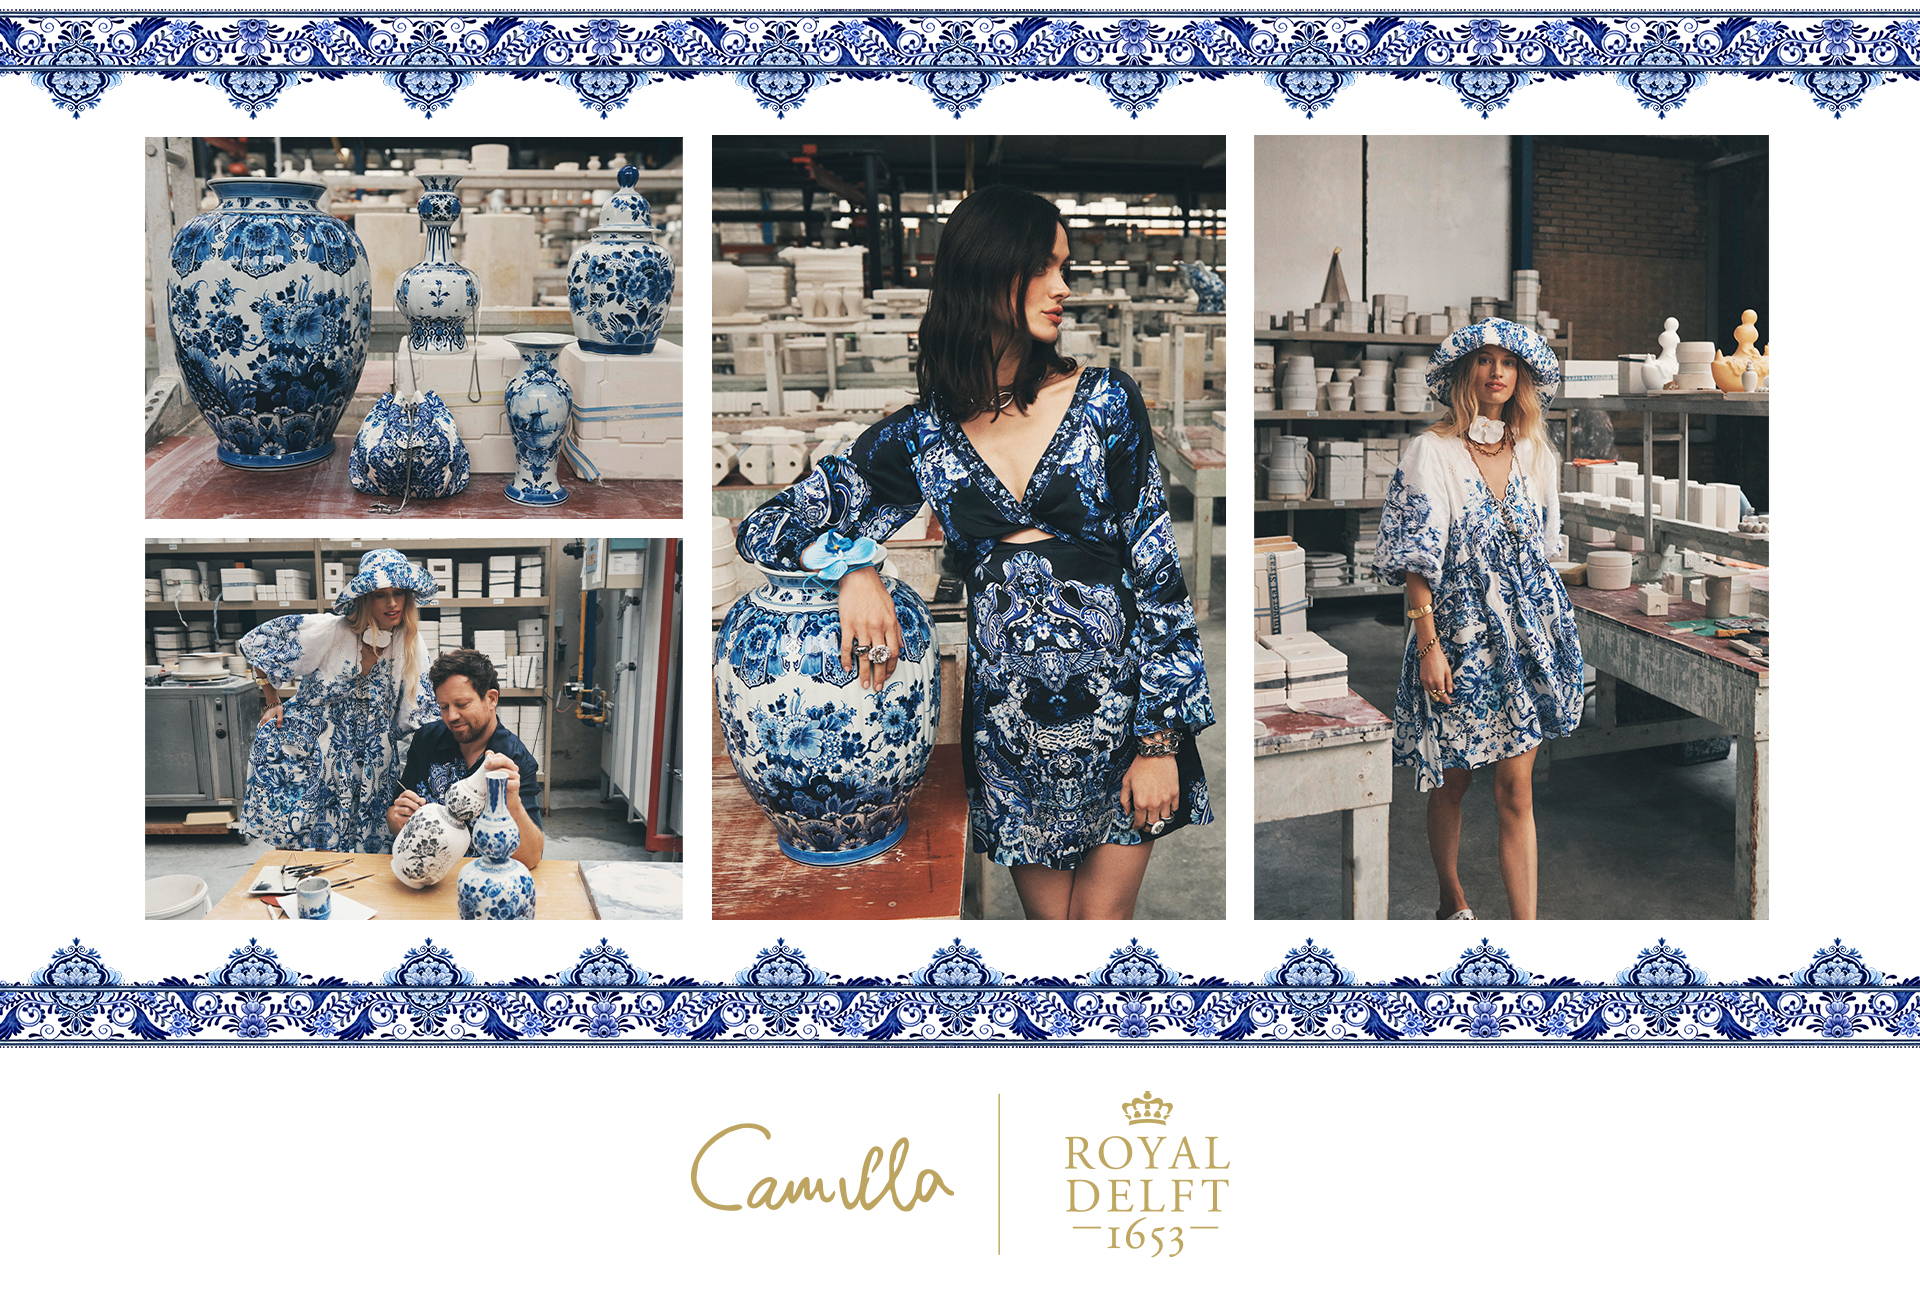 IMAGES WEARING CAMILLA ROYAL DELFT COLLECTION IN ROYAL DELFT FACTORY